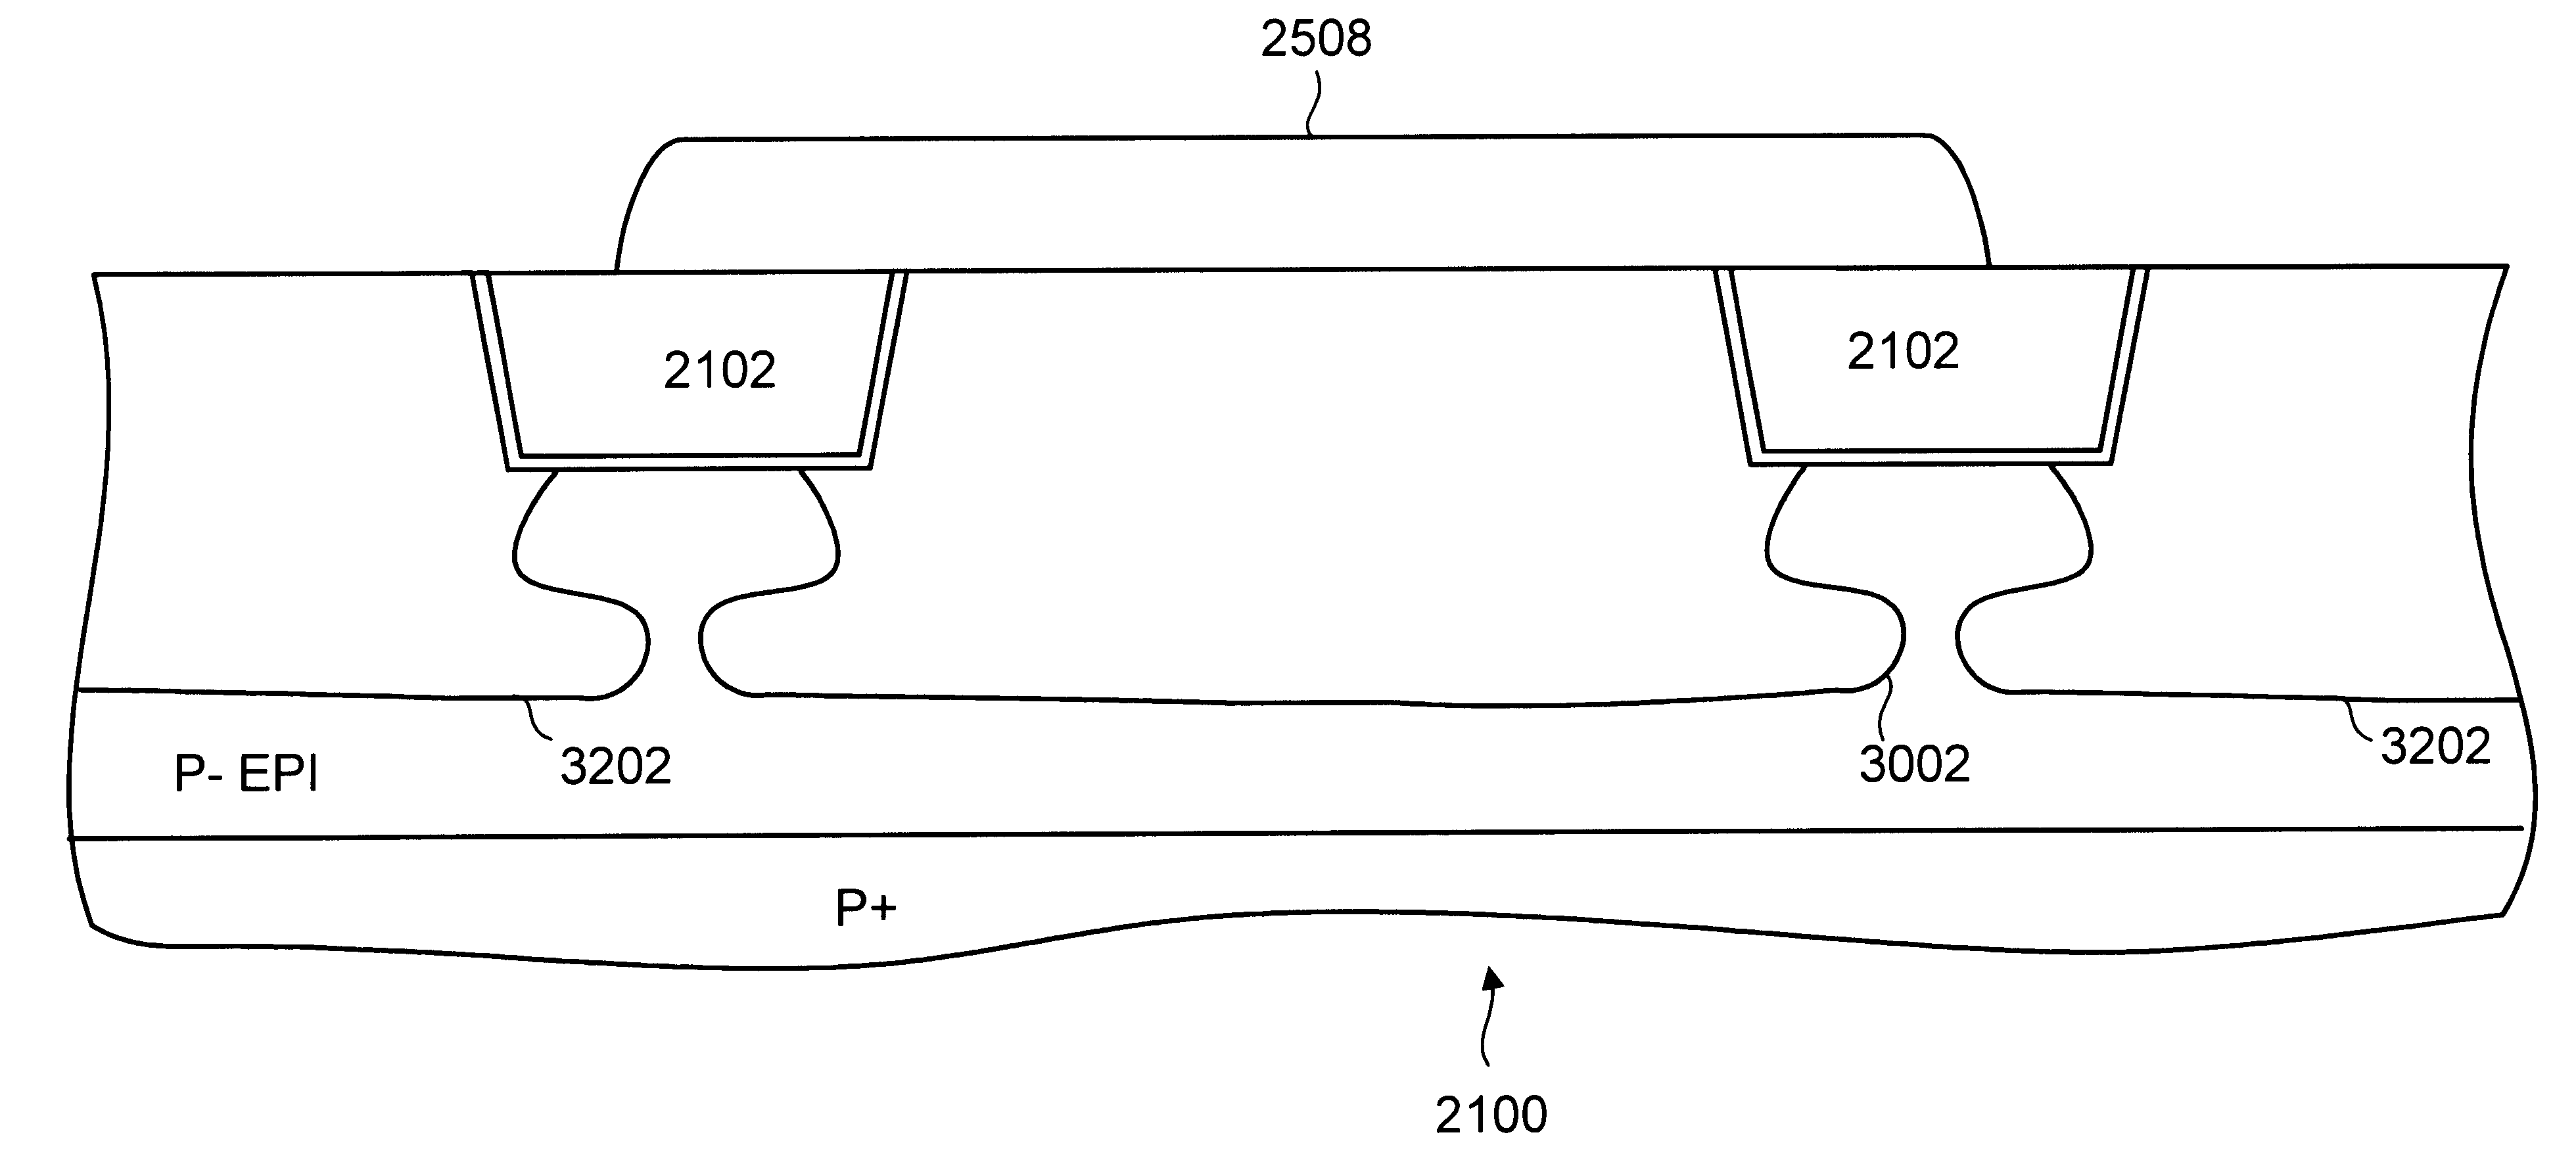 Method and structure to reduce latch-up using edge implants